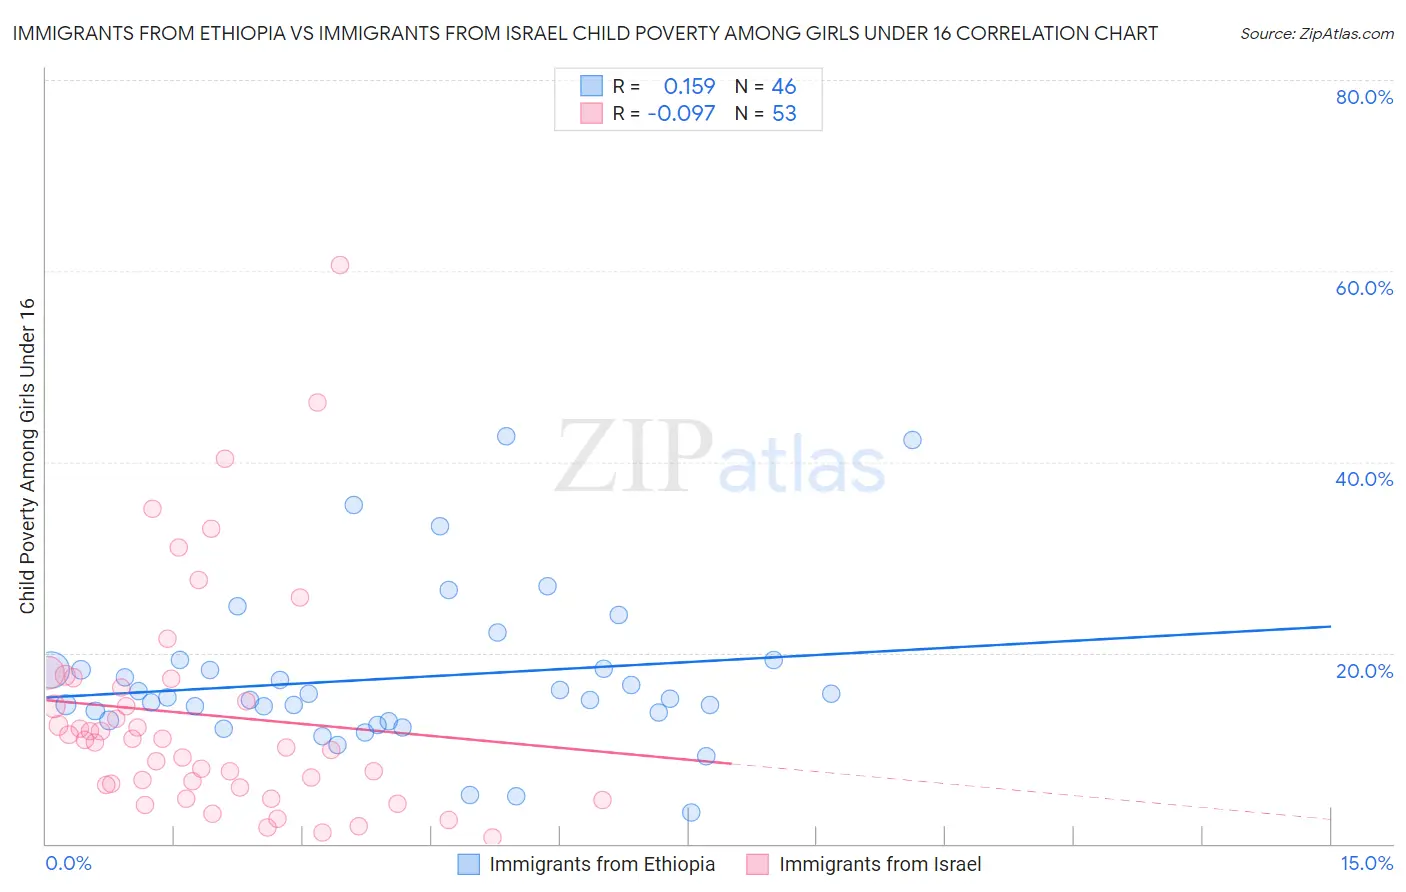 Immigrants from Ethiopia vs Immigrants from Israel Child Poverty Among Girls Under 16